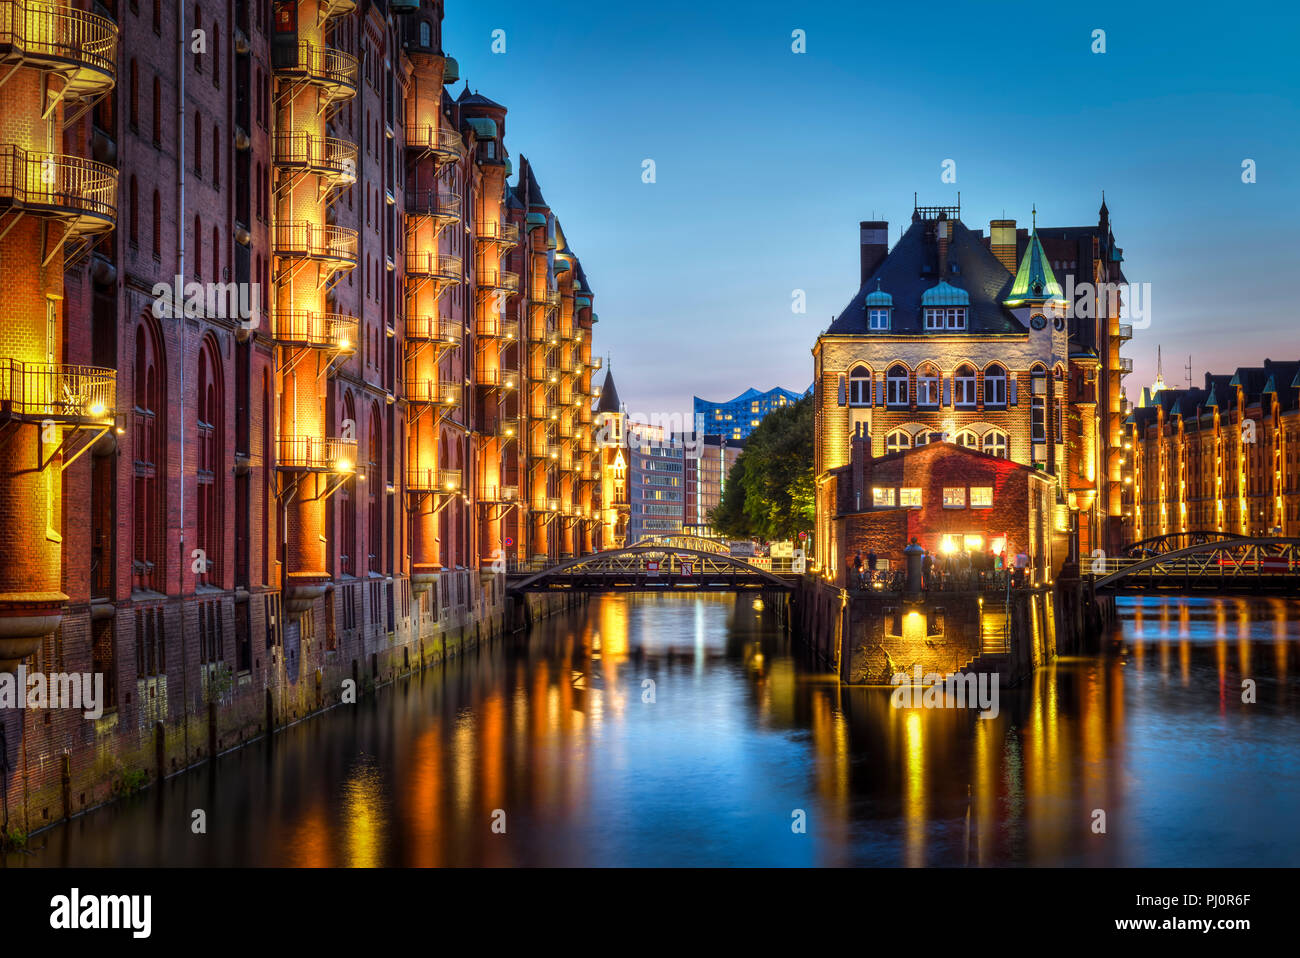 Water castle in the warehouse district Speicherstadt in Hamburg, Germany Stock Photo